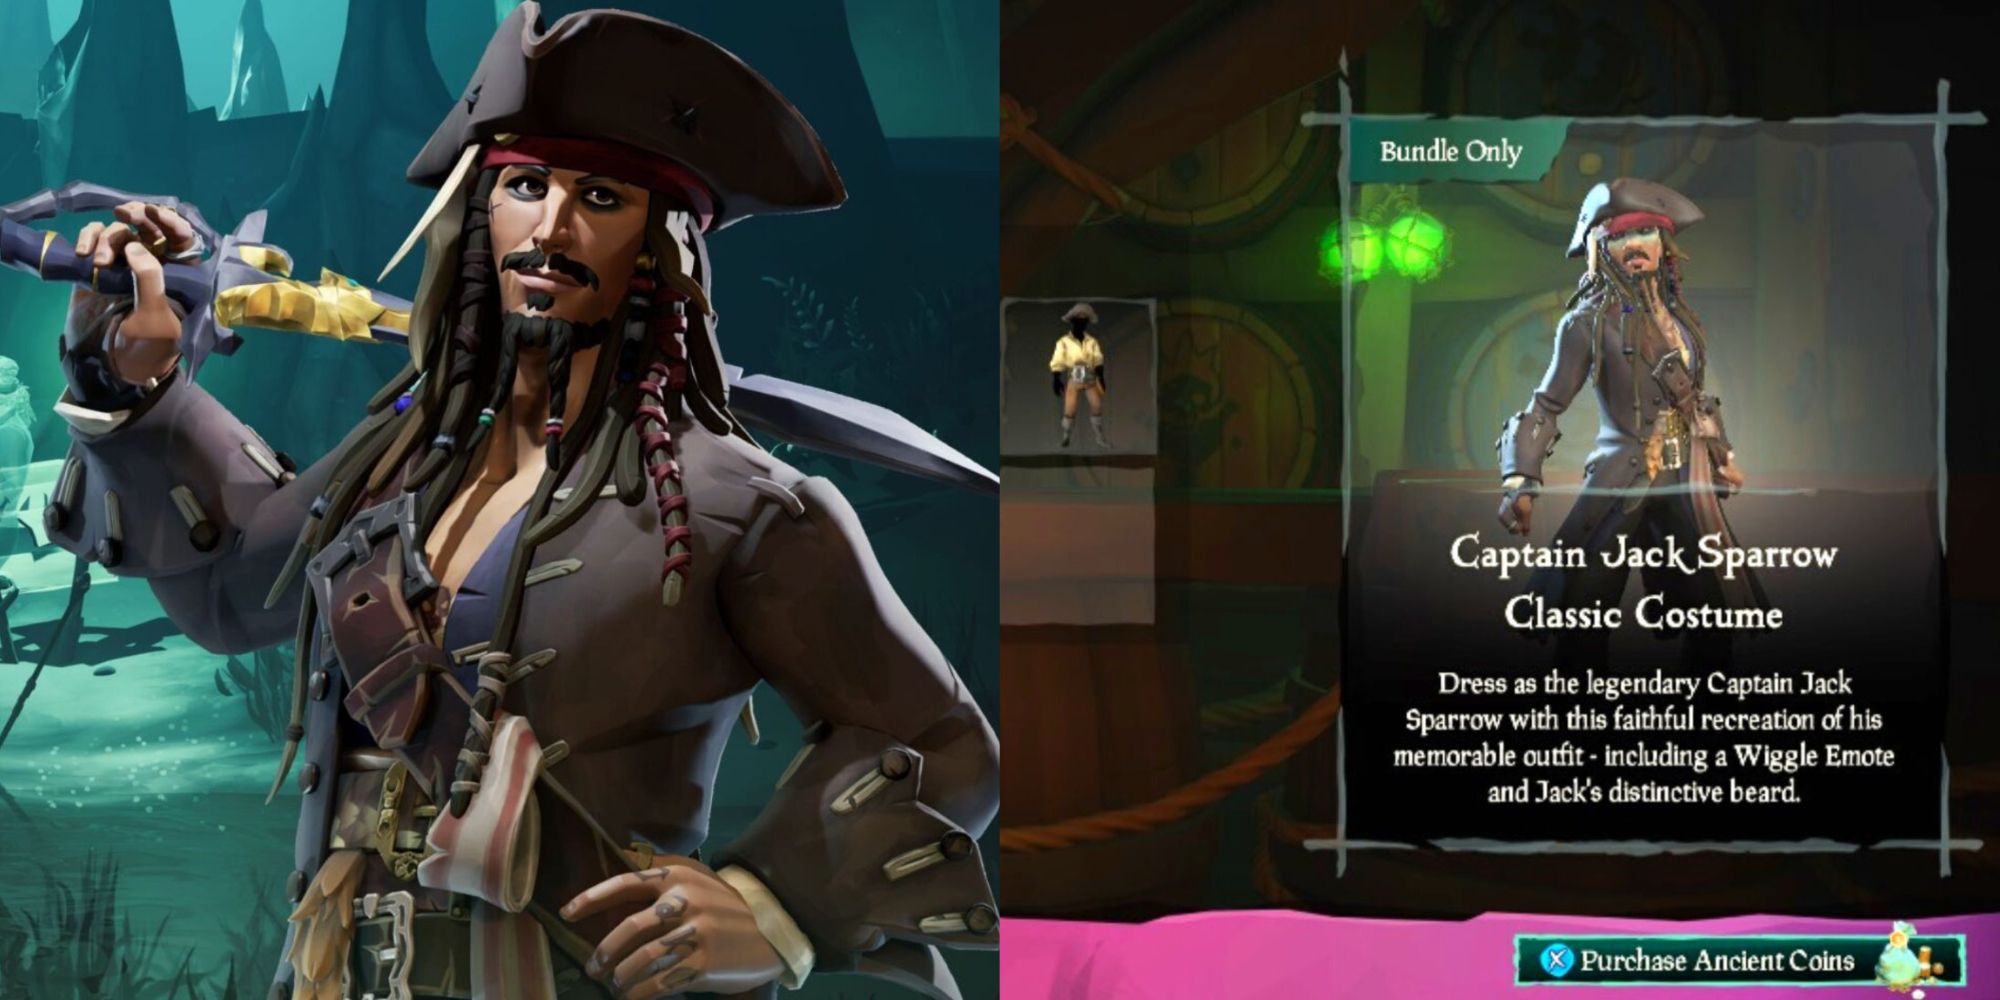 Captain Jack Sparrow And The Classic Captain Jack Sparrow Costume In Sea Of Thieves